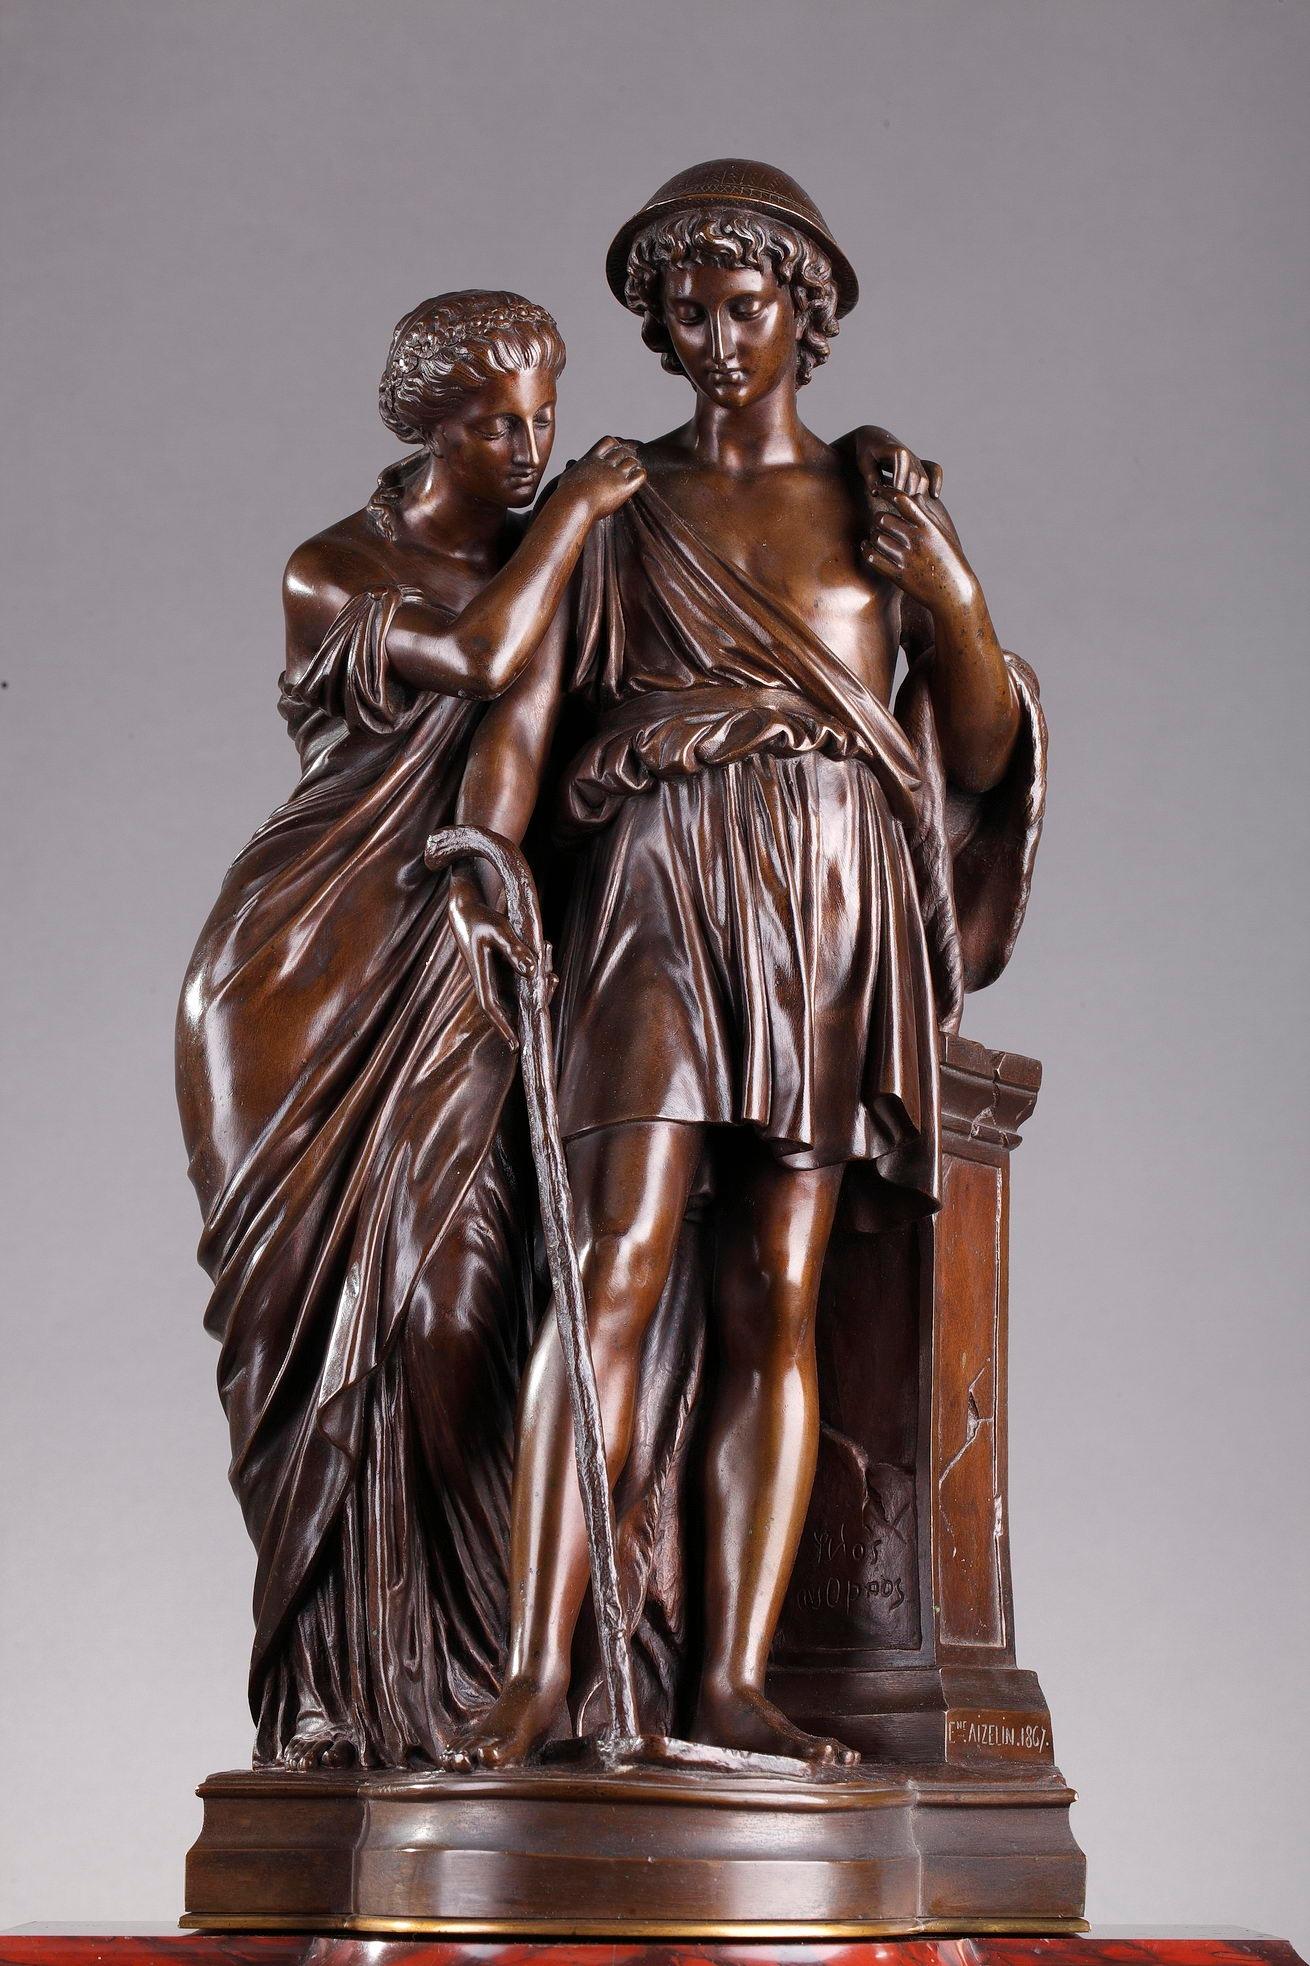 Red Griotte mantel (fireplace) clock decorated with a patinated bronze group, Les bergers d'Arcadie (Shepherds of Arcadia) by Eugene-Antoine Aizelin (1821-1902), featuring a maiden and a shepherd mourning at a tomb. The woman is wearing a flowing